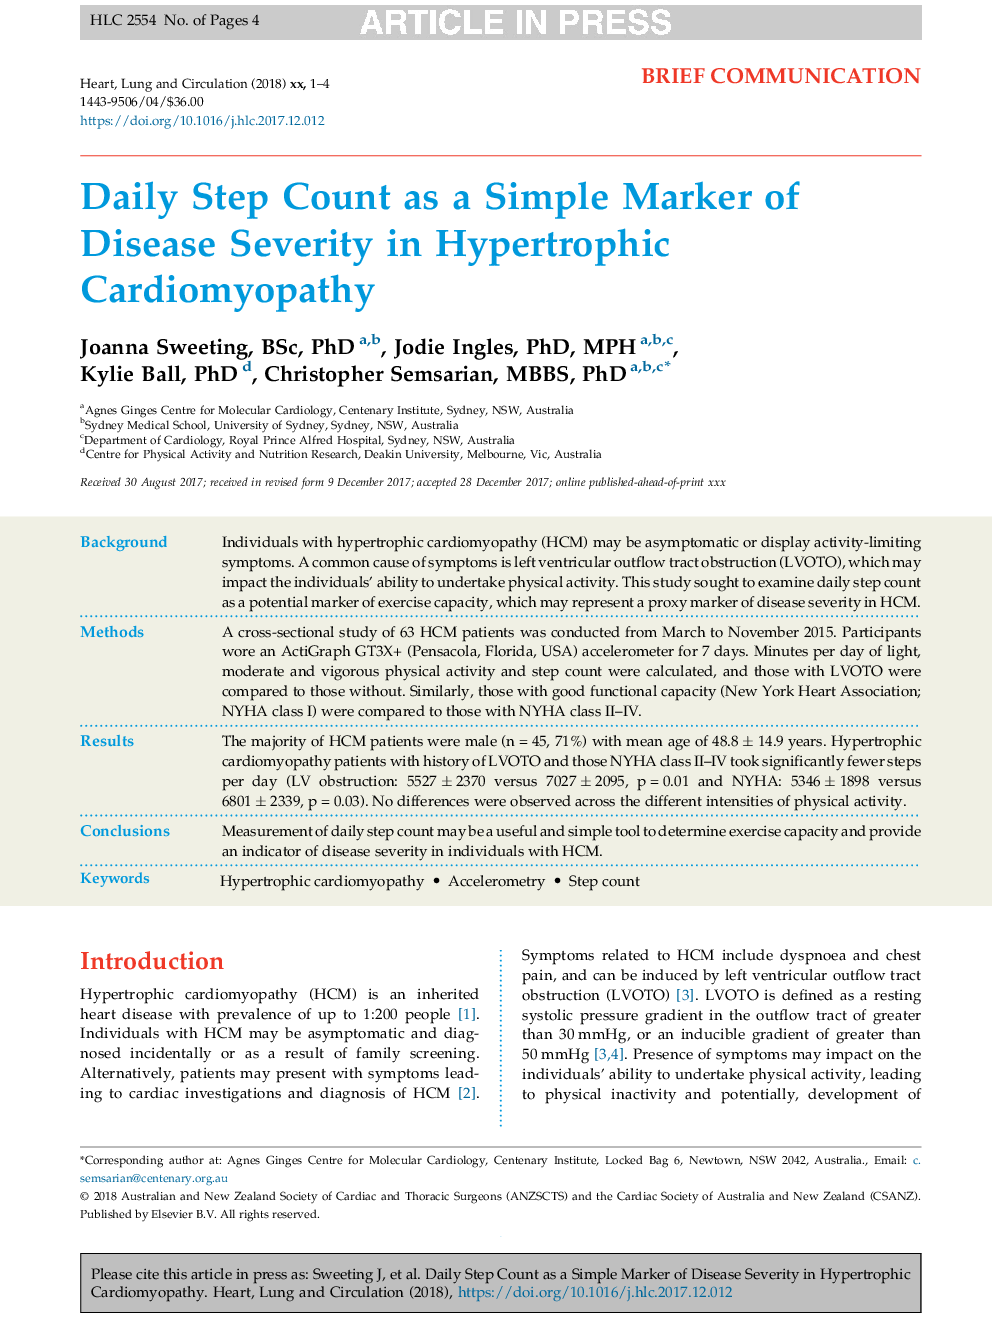 Daily Step Count as a Simple Marker of Disease Severity in Hypertrophic Cardiomyopathy